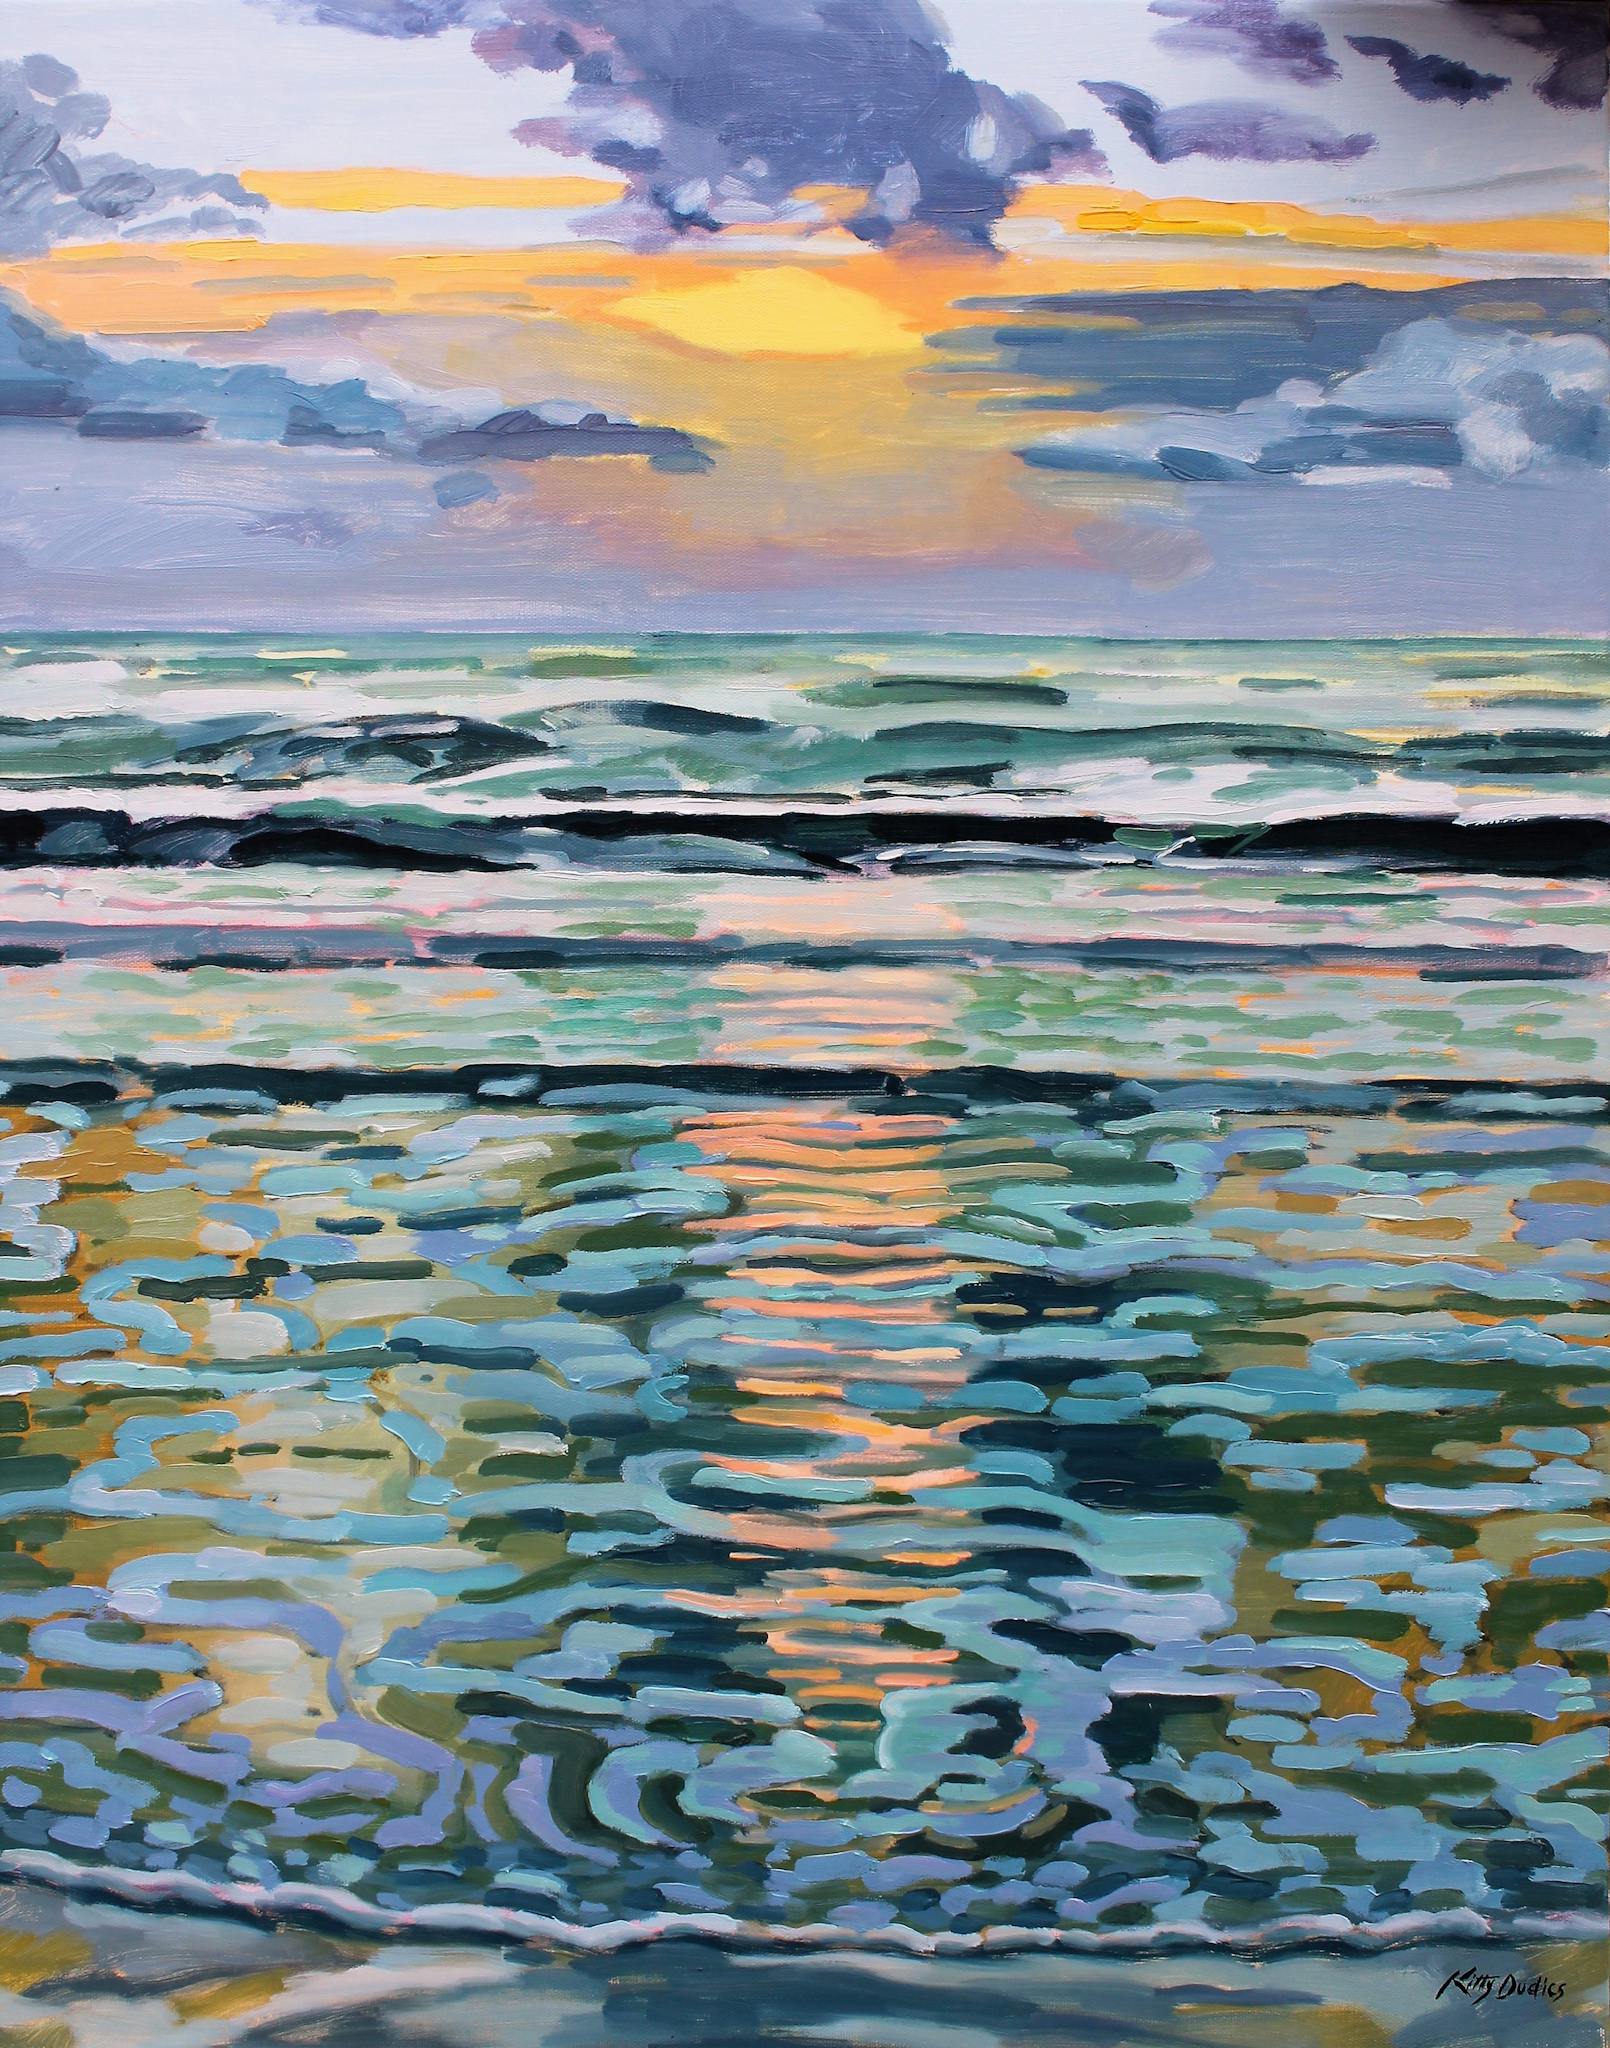 Kitty Welsh's painting of the ocean reflecting a sunset.